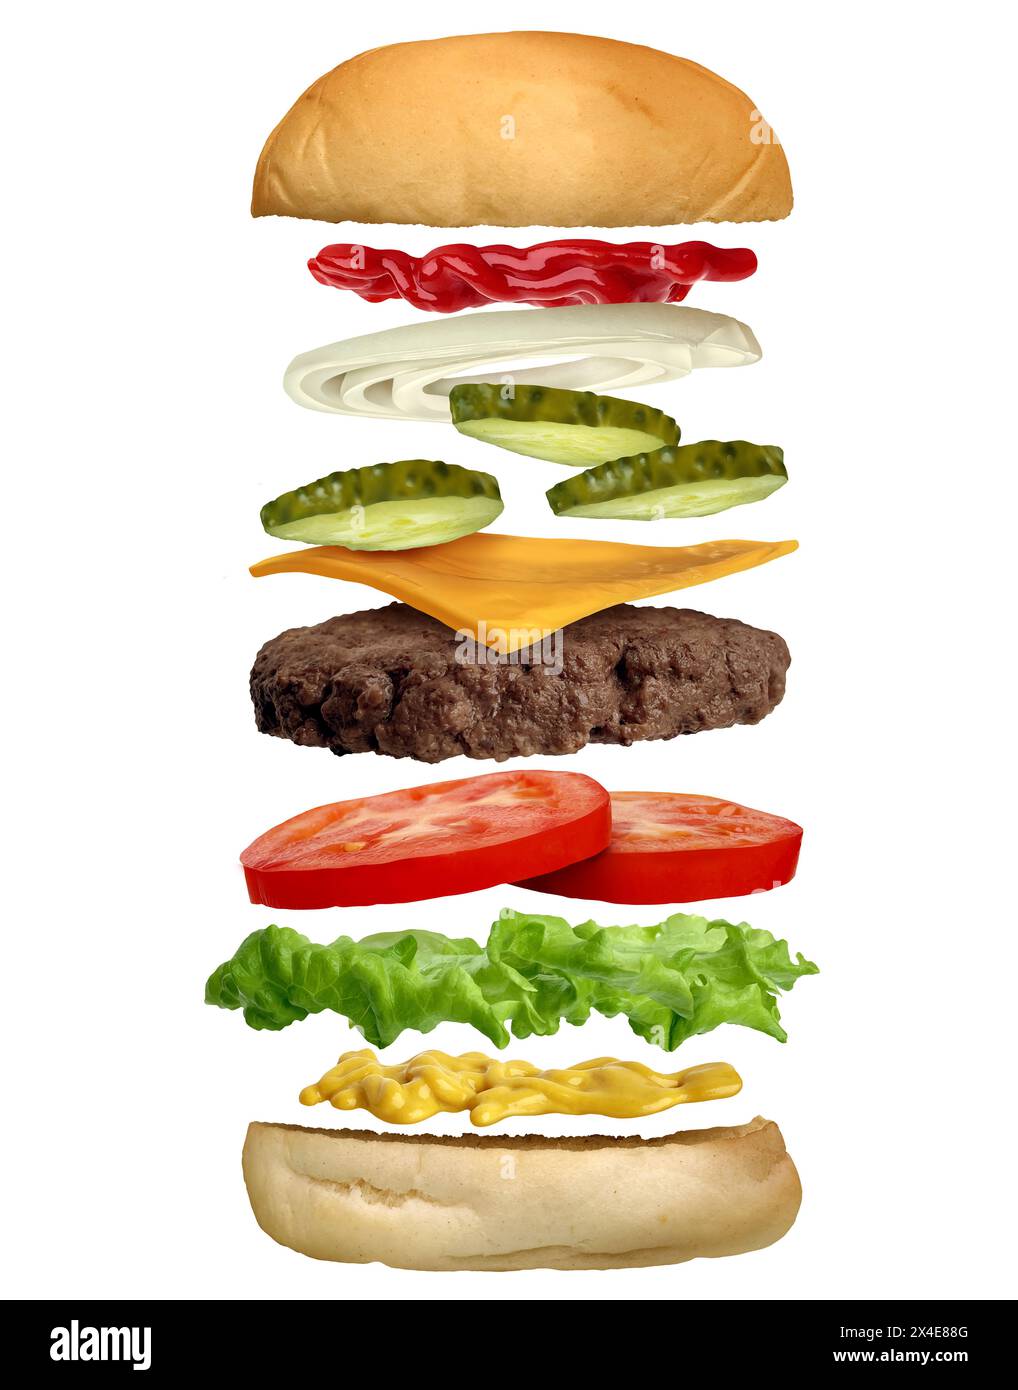 Assembling A Burger as individual toppings ingredients assembled for a perfect classic hamburger with a meat patty lettuce onions ketchup sauce pickle Stock Photo